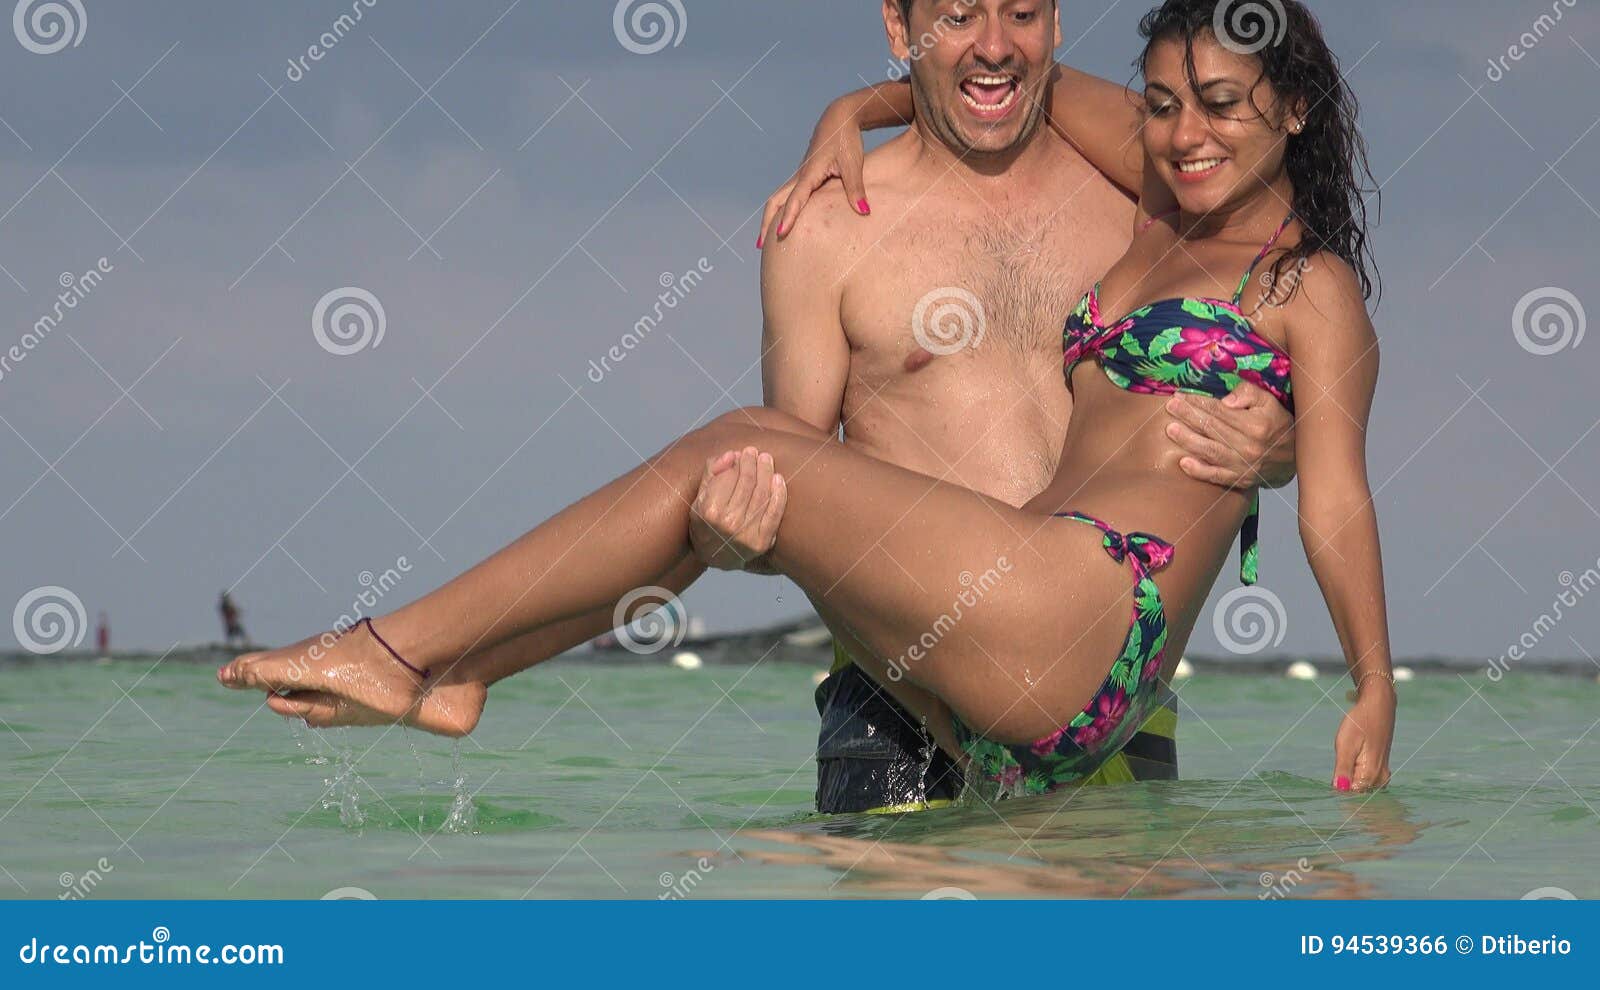 Man Throws Woman into Water and Splashing Stock Footage